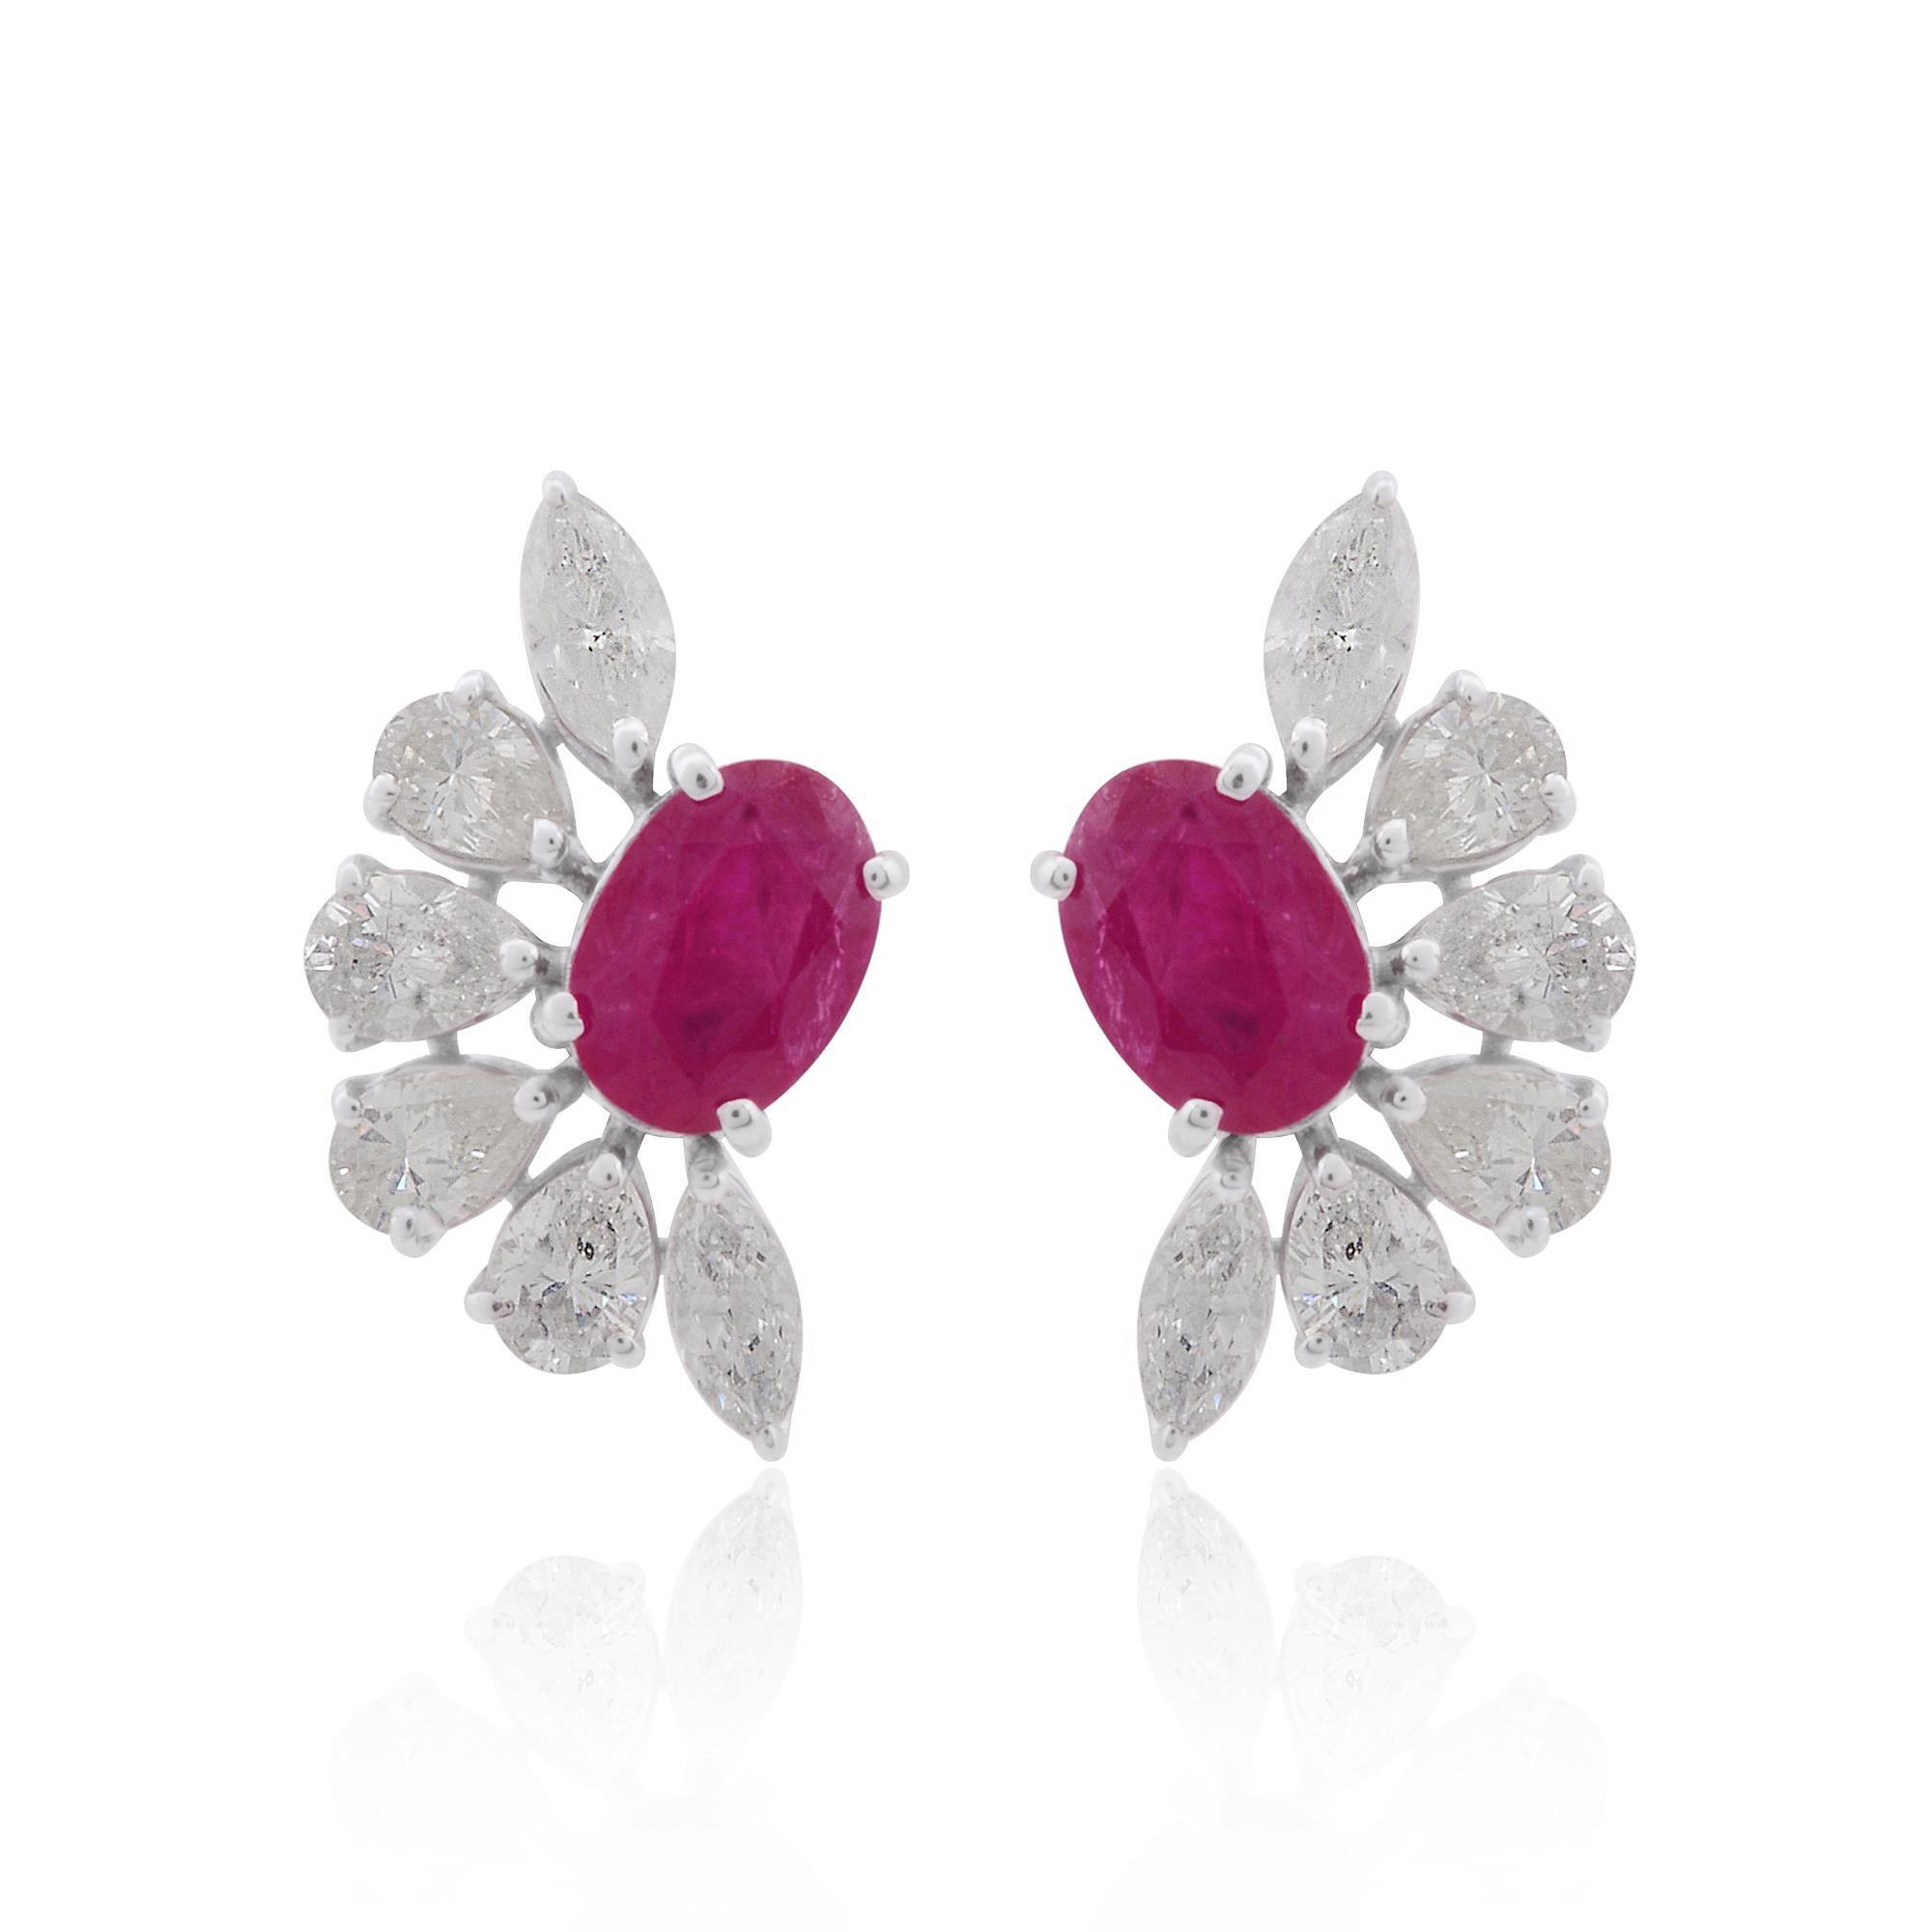 Item Code :- STE-1047
Gross Wet :- 3.07 gm
10k White Gold Wet :- 2.43 gm
Diamond Wet :- 1.70 ct ( SI Clarity & HI Color )
Ruby Wet :- 1.50 ct
Earrings Size :- 17x10 mm approx.
✦ Sizing
.....................
We can adjust most items to fit your